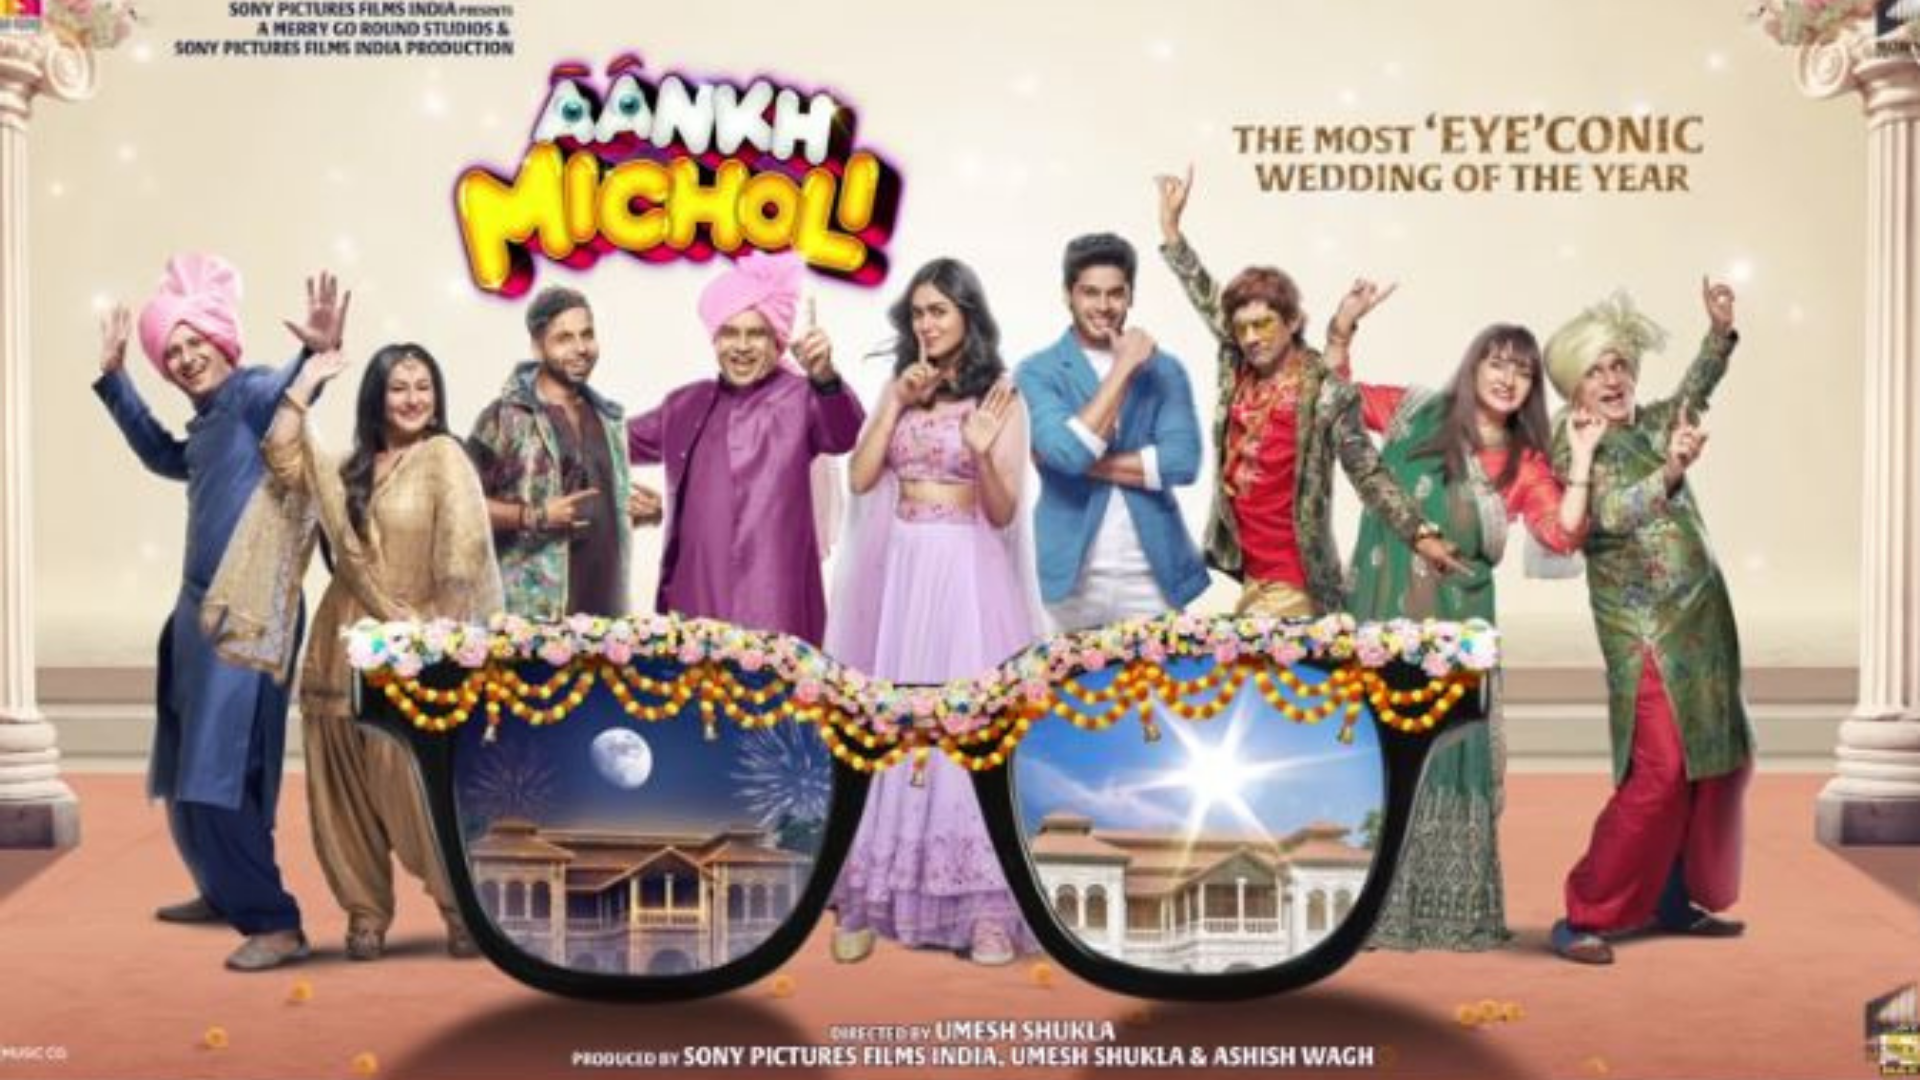 Aankh Micholi Movie Ticket Offers - Release Date, Cast And More